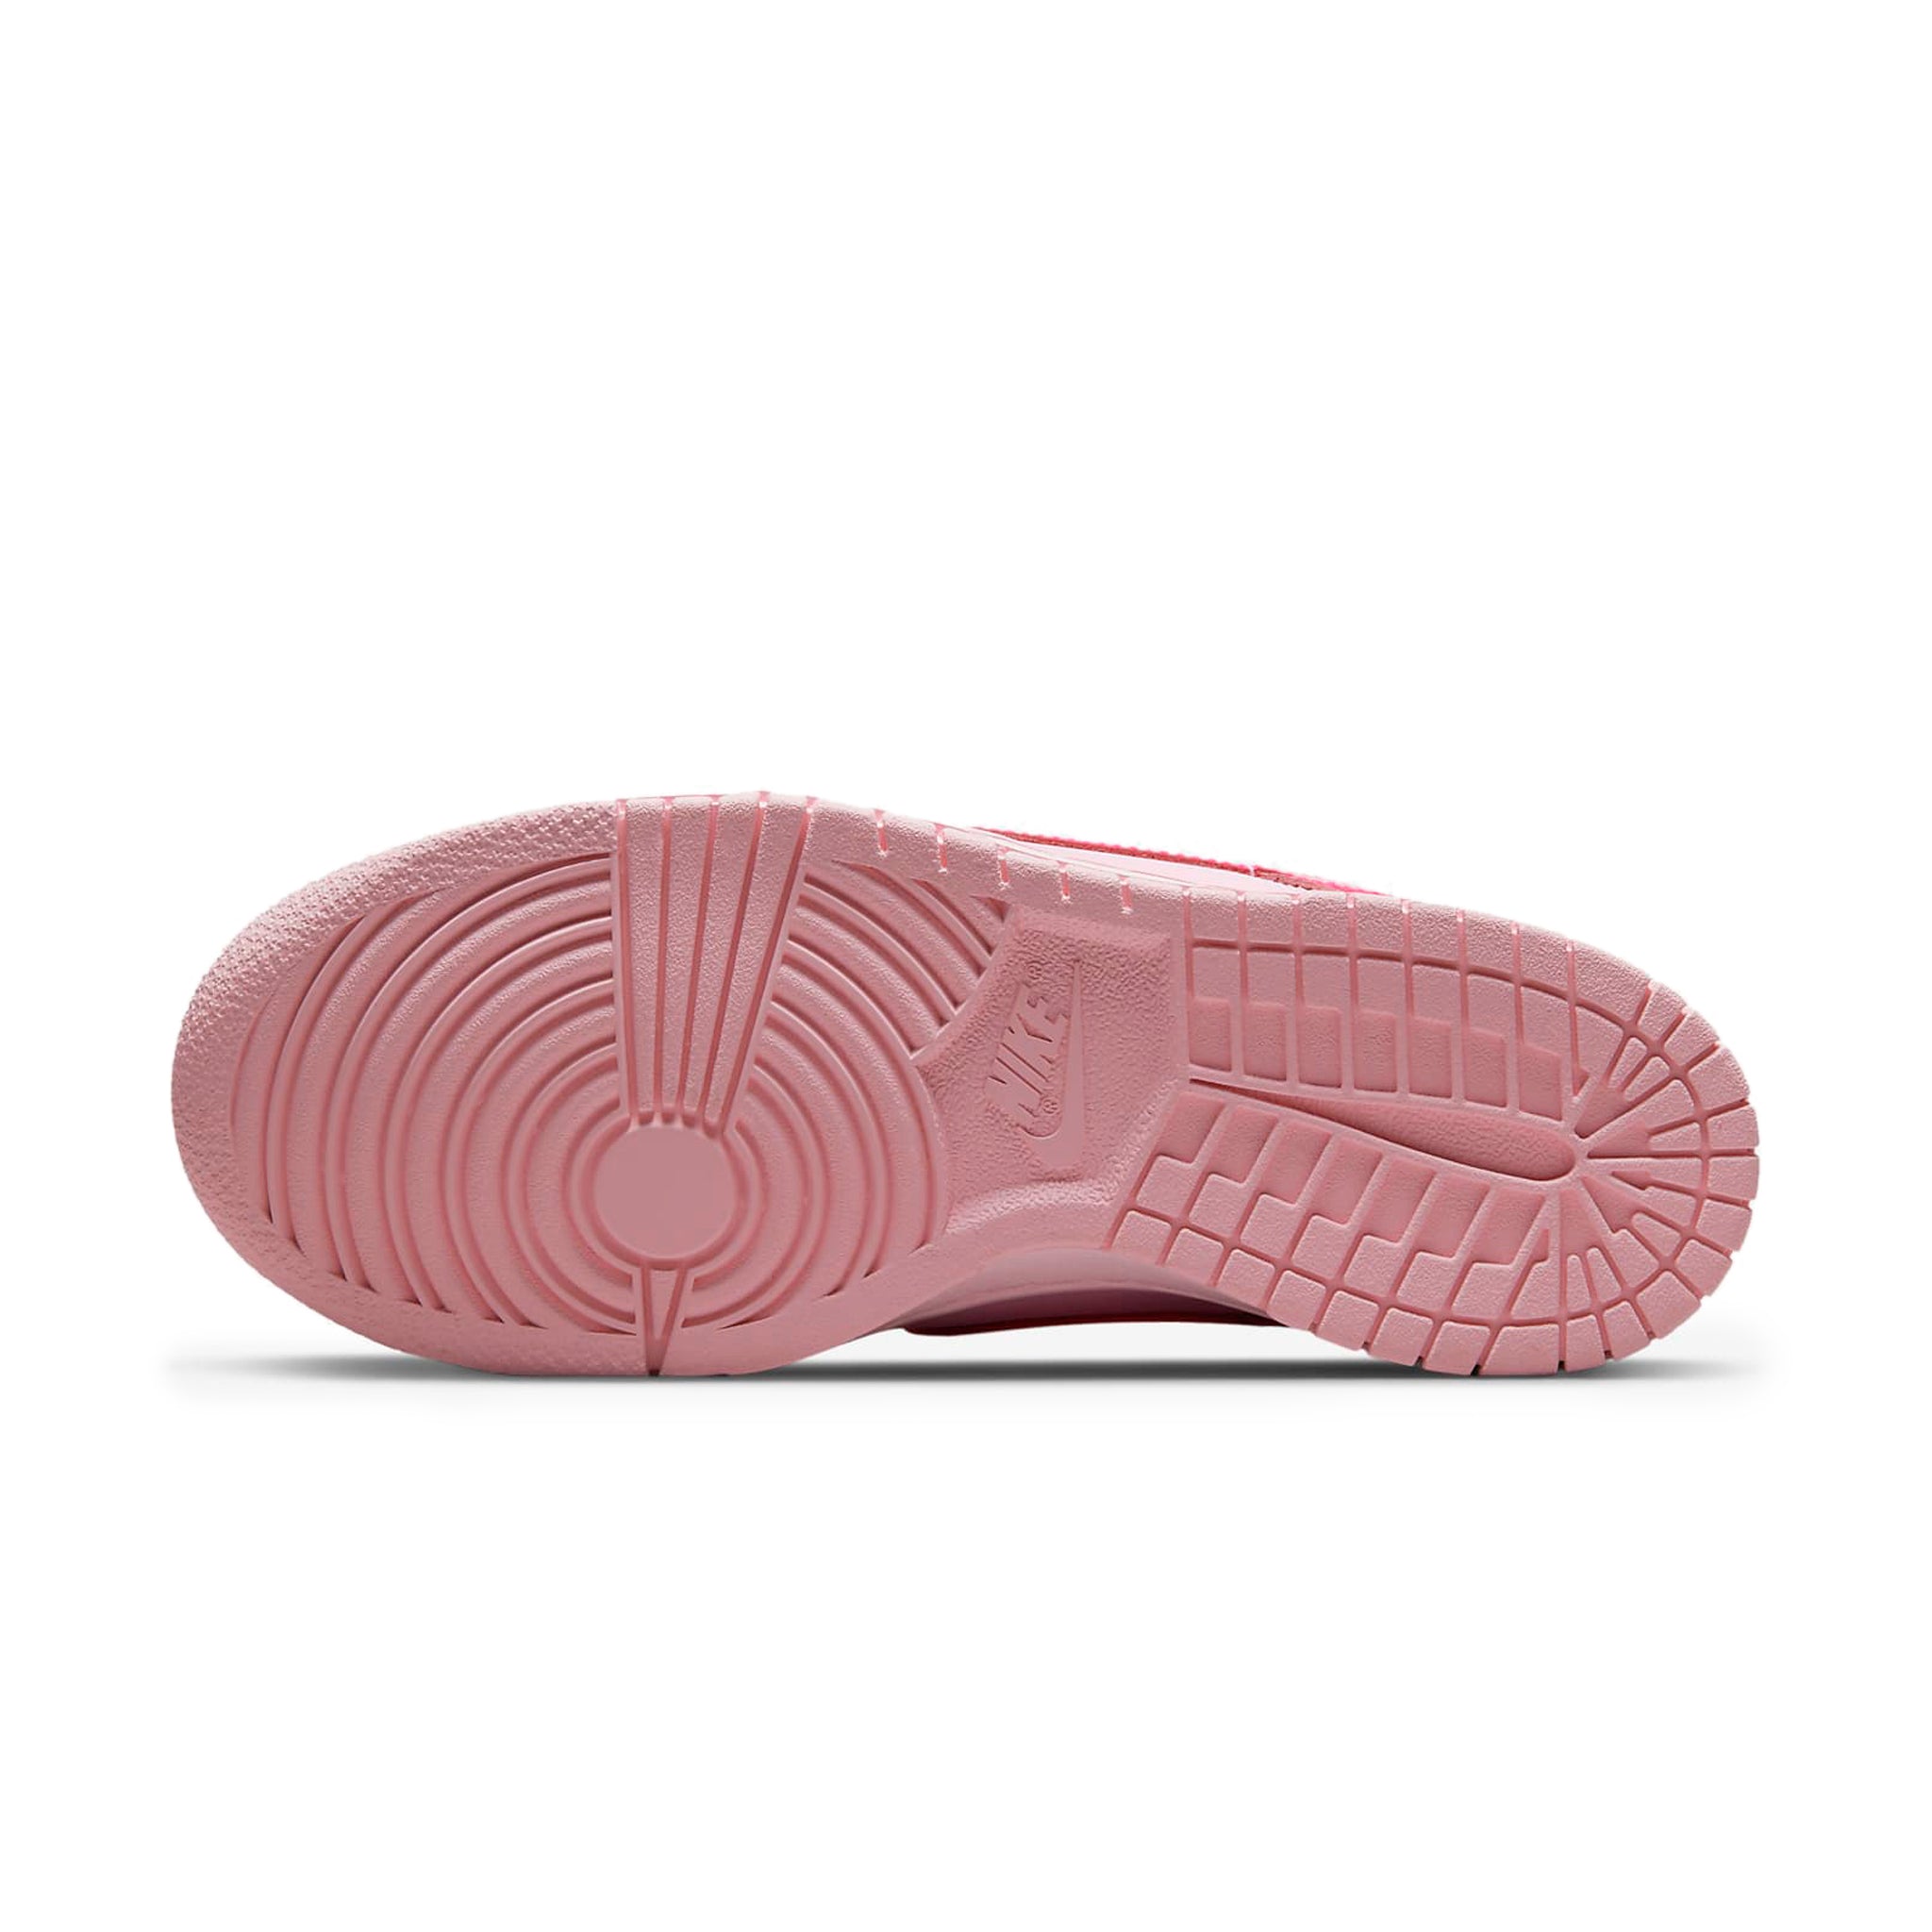 Sole view of Nike Dunk Low Triple Pink (GS) DH9765-600